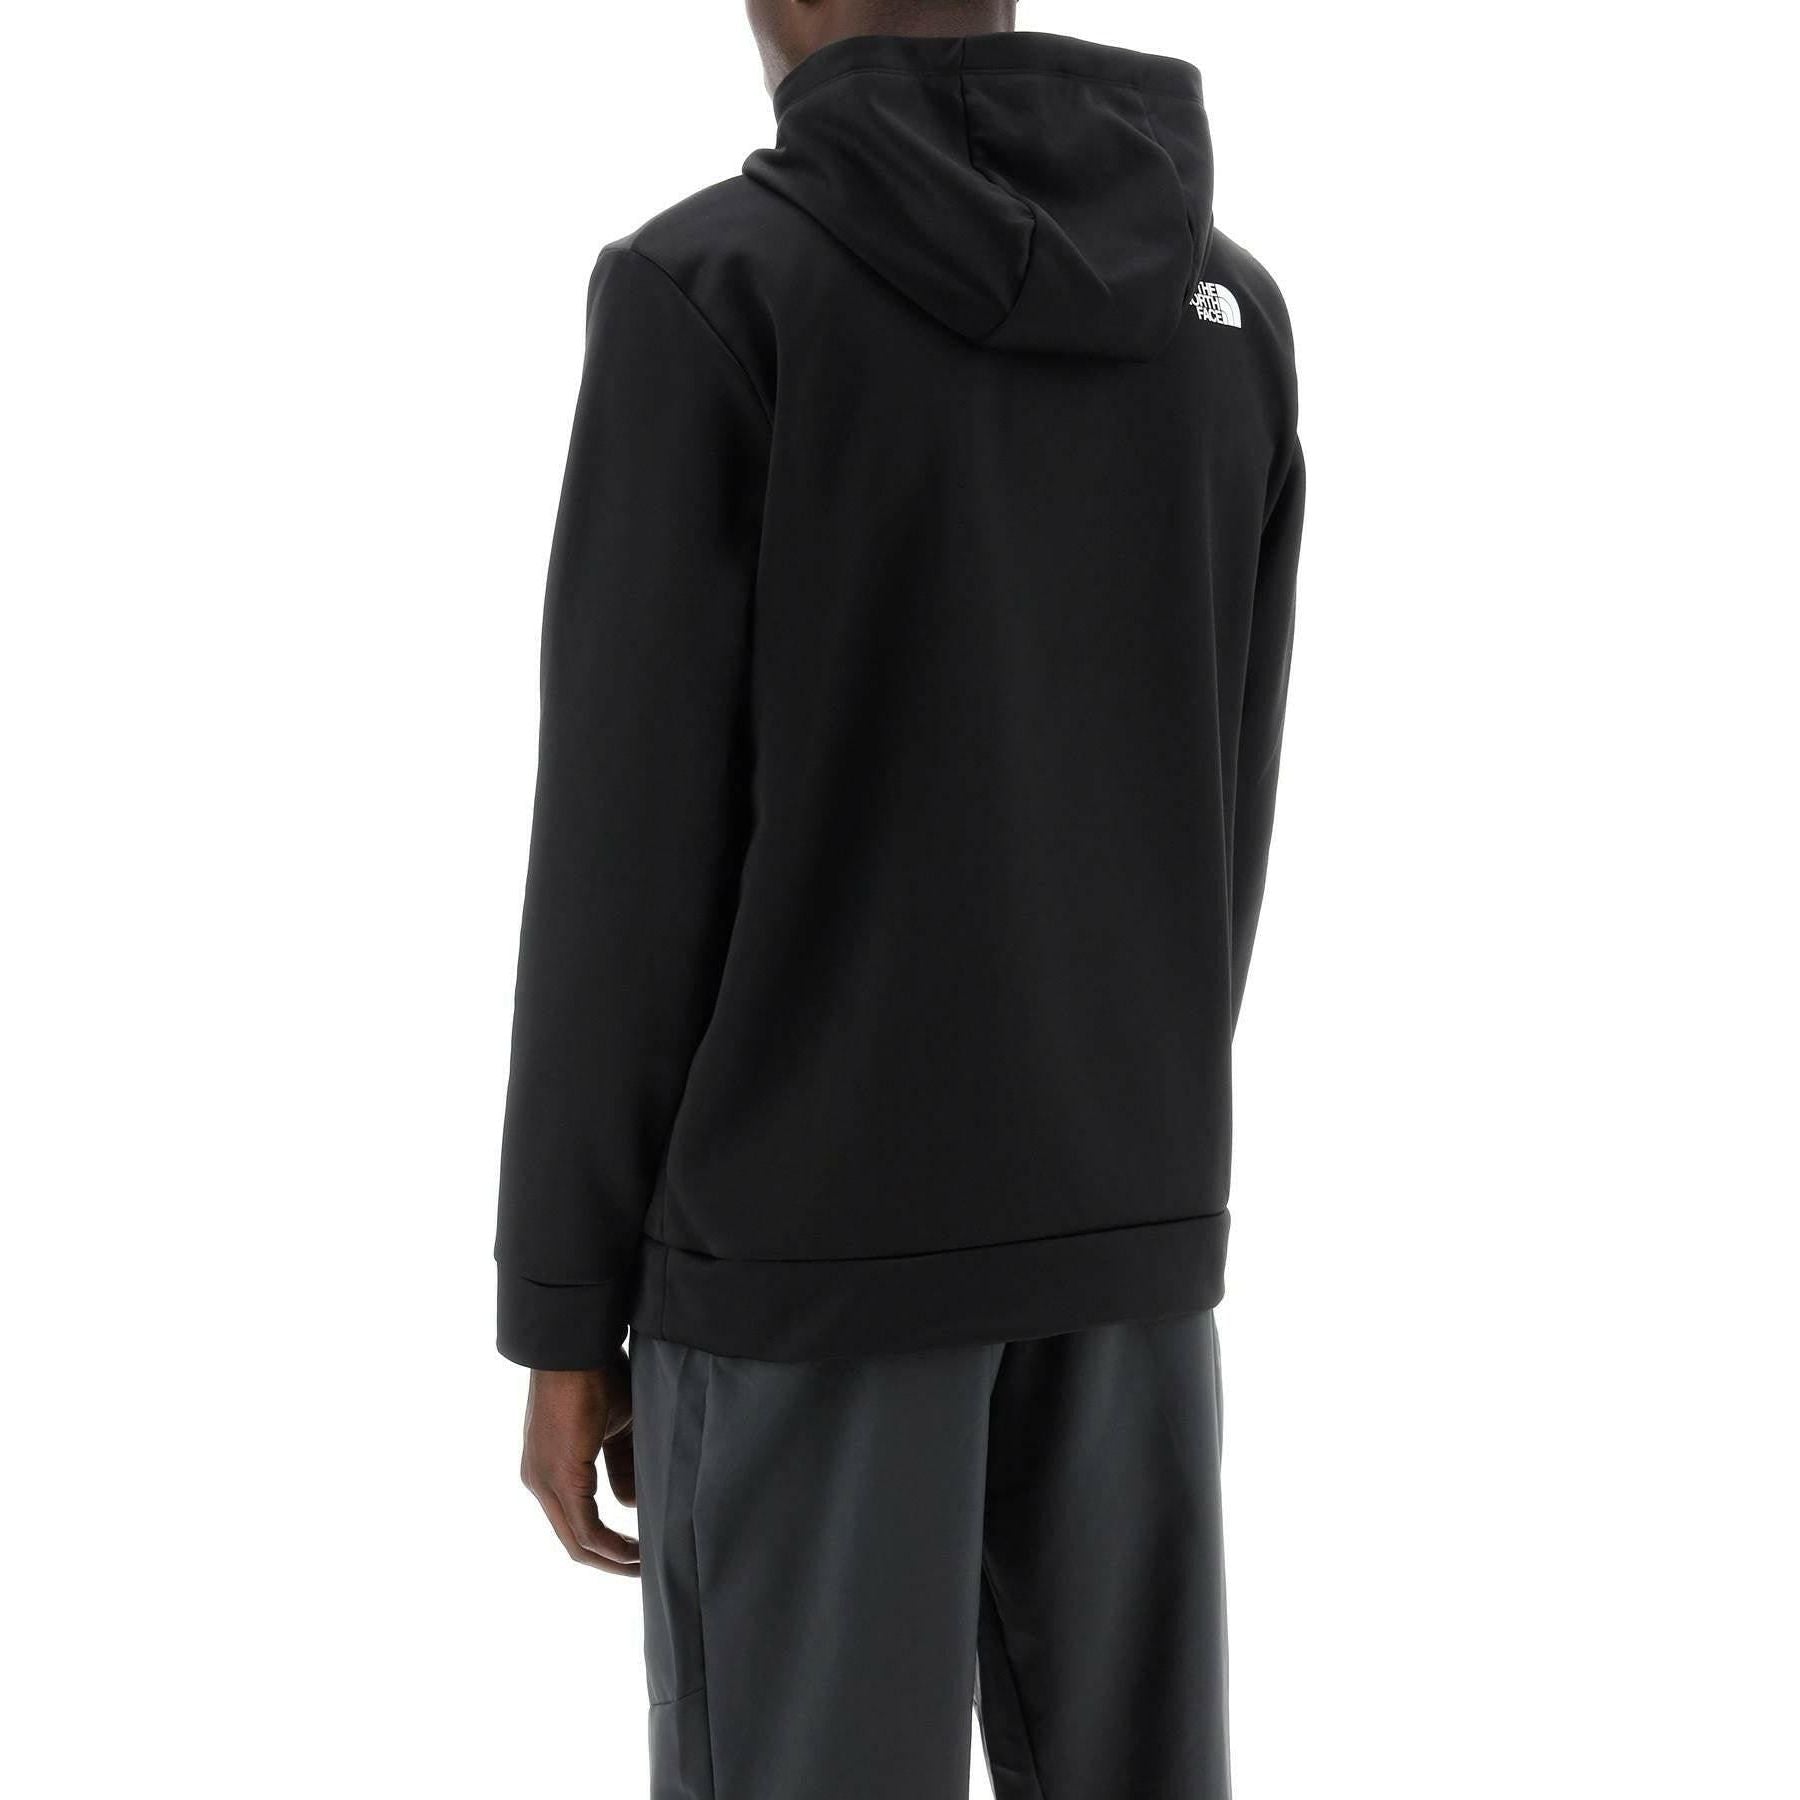 Black and Asphalt Gray Reaxion Hooded Sweater THE NORTH FACE JOHN JULIA.